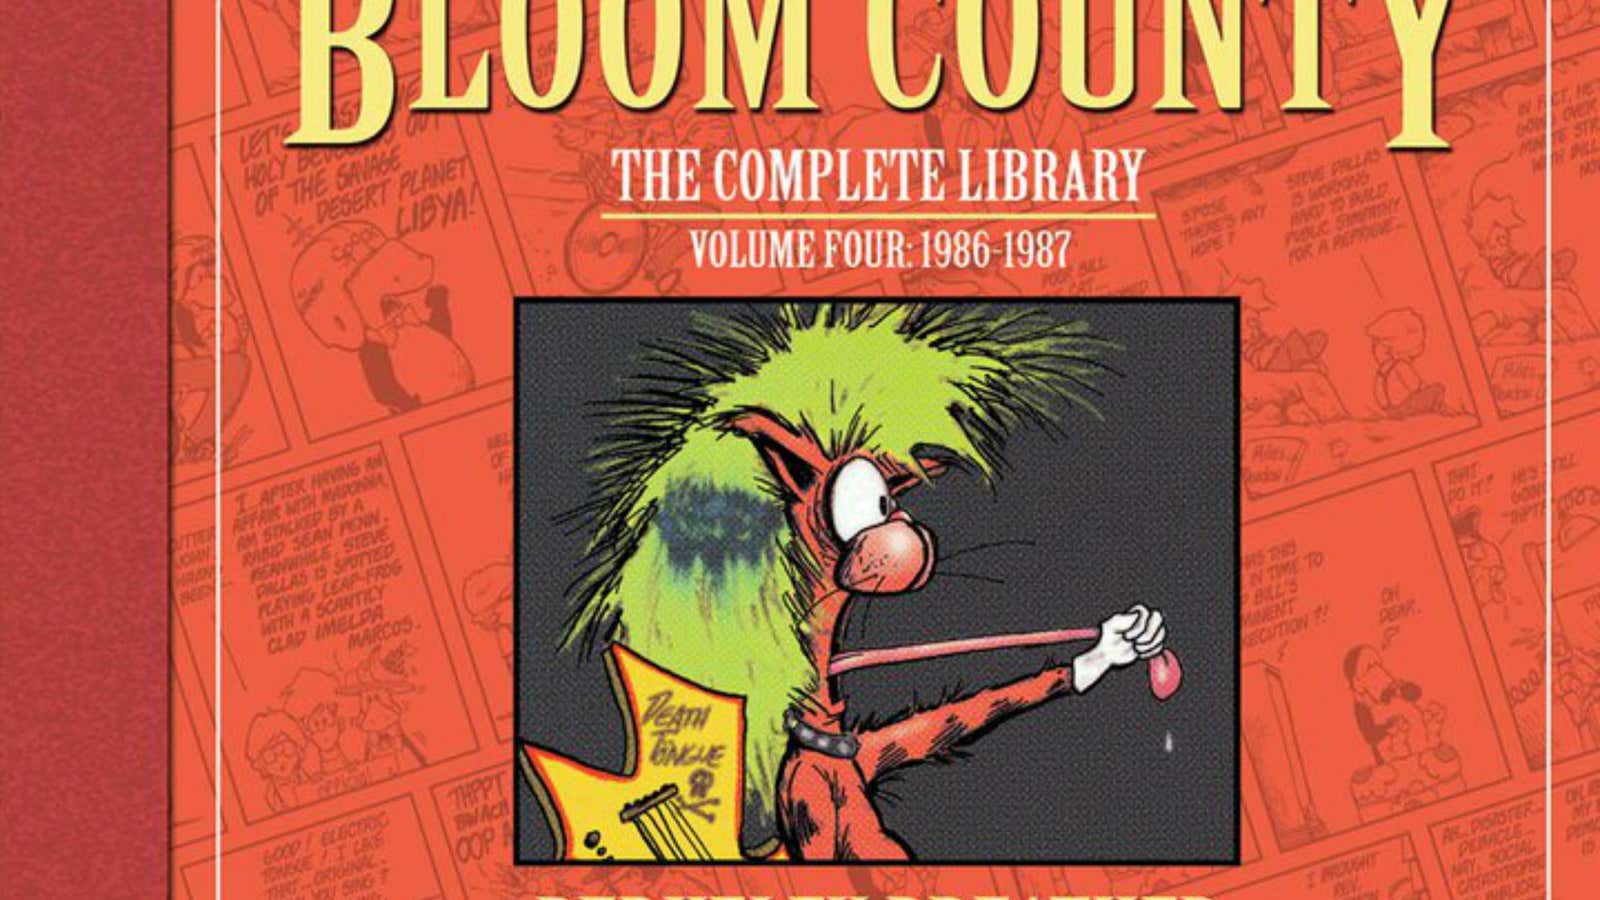 “Bloom County” is returning after 25 years—and we may have Donald Trump to thank